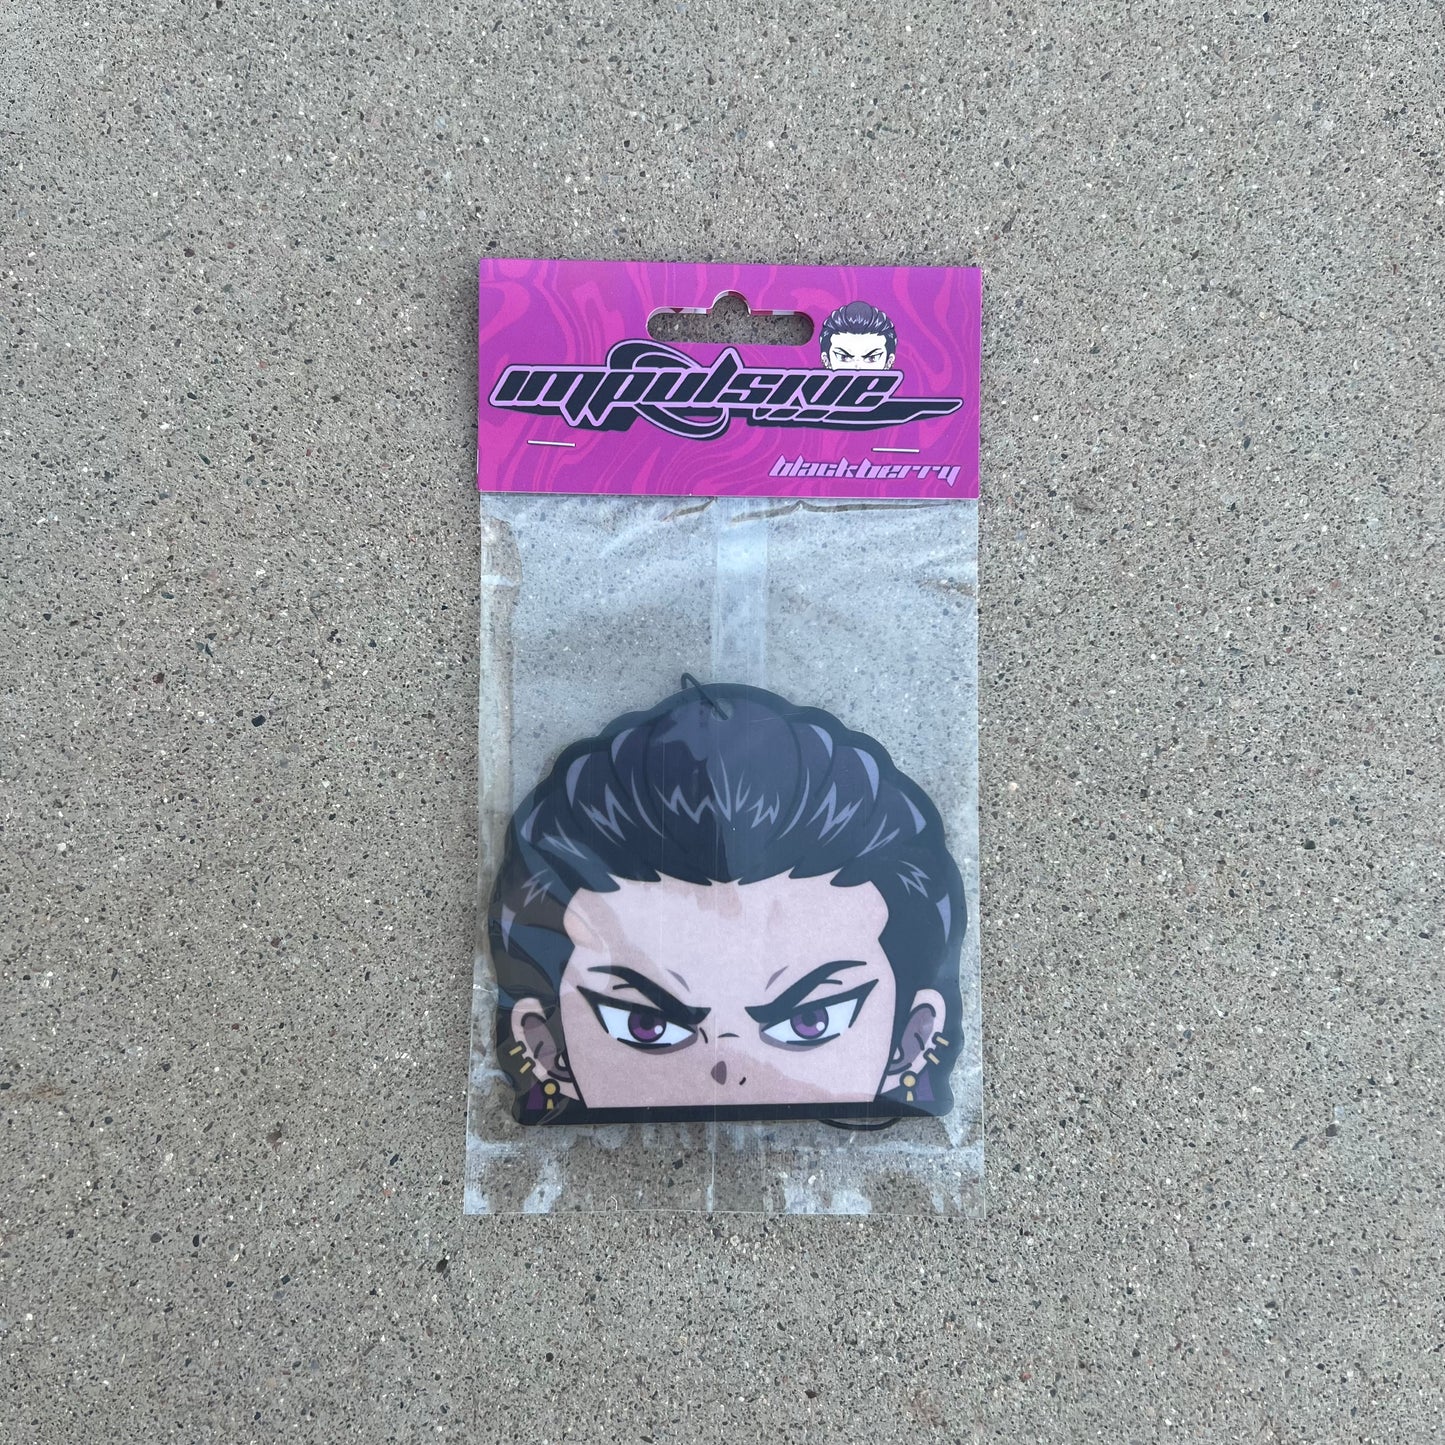 Anime Reyna Anime Character Air Freshener. Purple slick back hair with purple eyes and gold cuff earrings. Angry japanese air freshener hanging from black string. Purple swirl background with impulsive llc retro y2k logo and blackberry label cardboard head card packaging. 